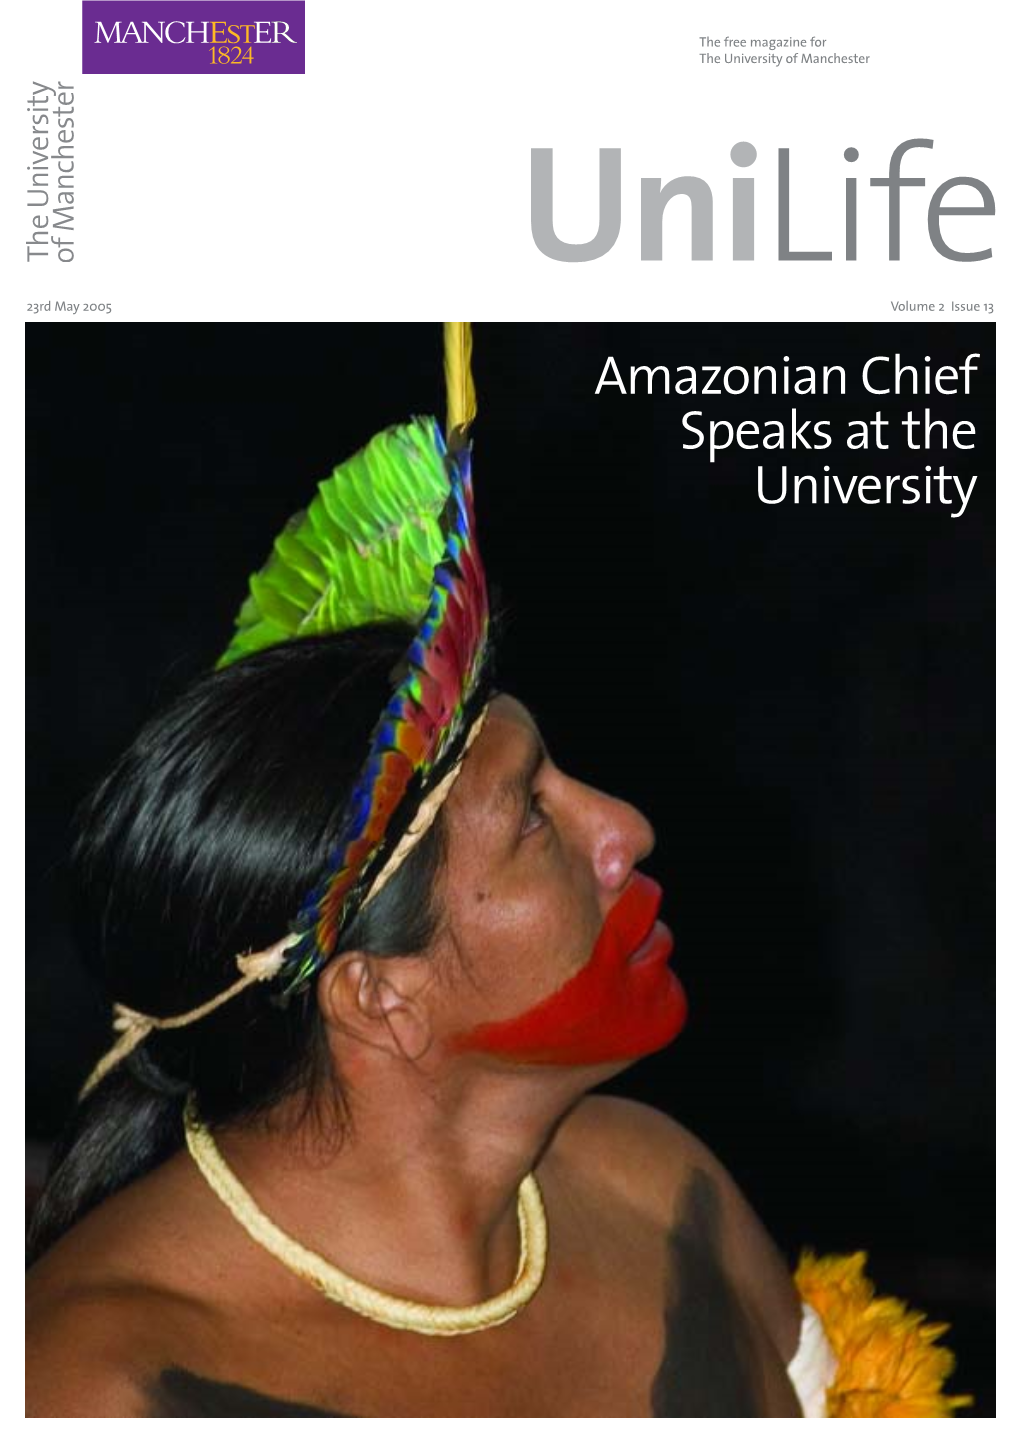 Amazonian Chief Speaks at the University